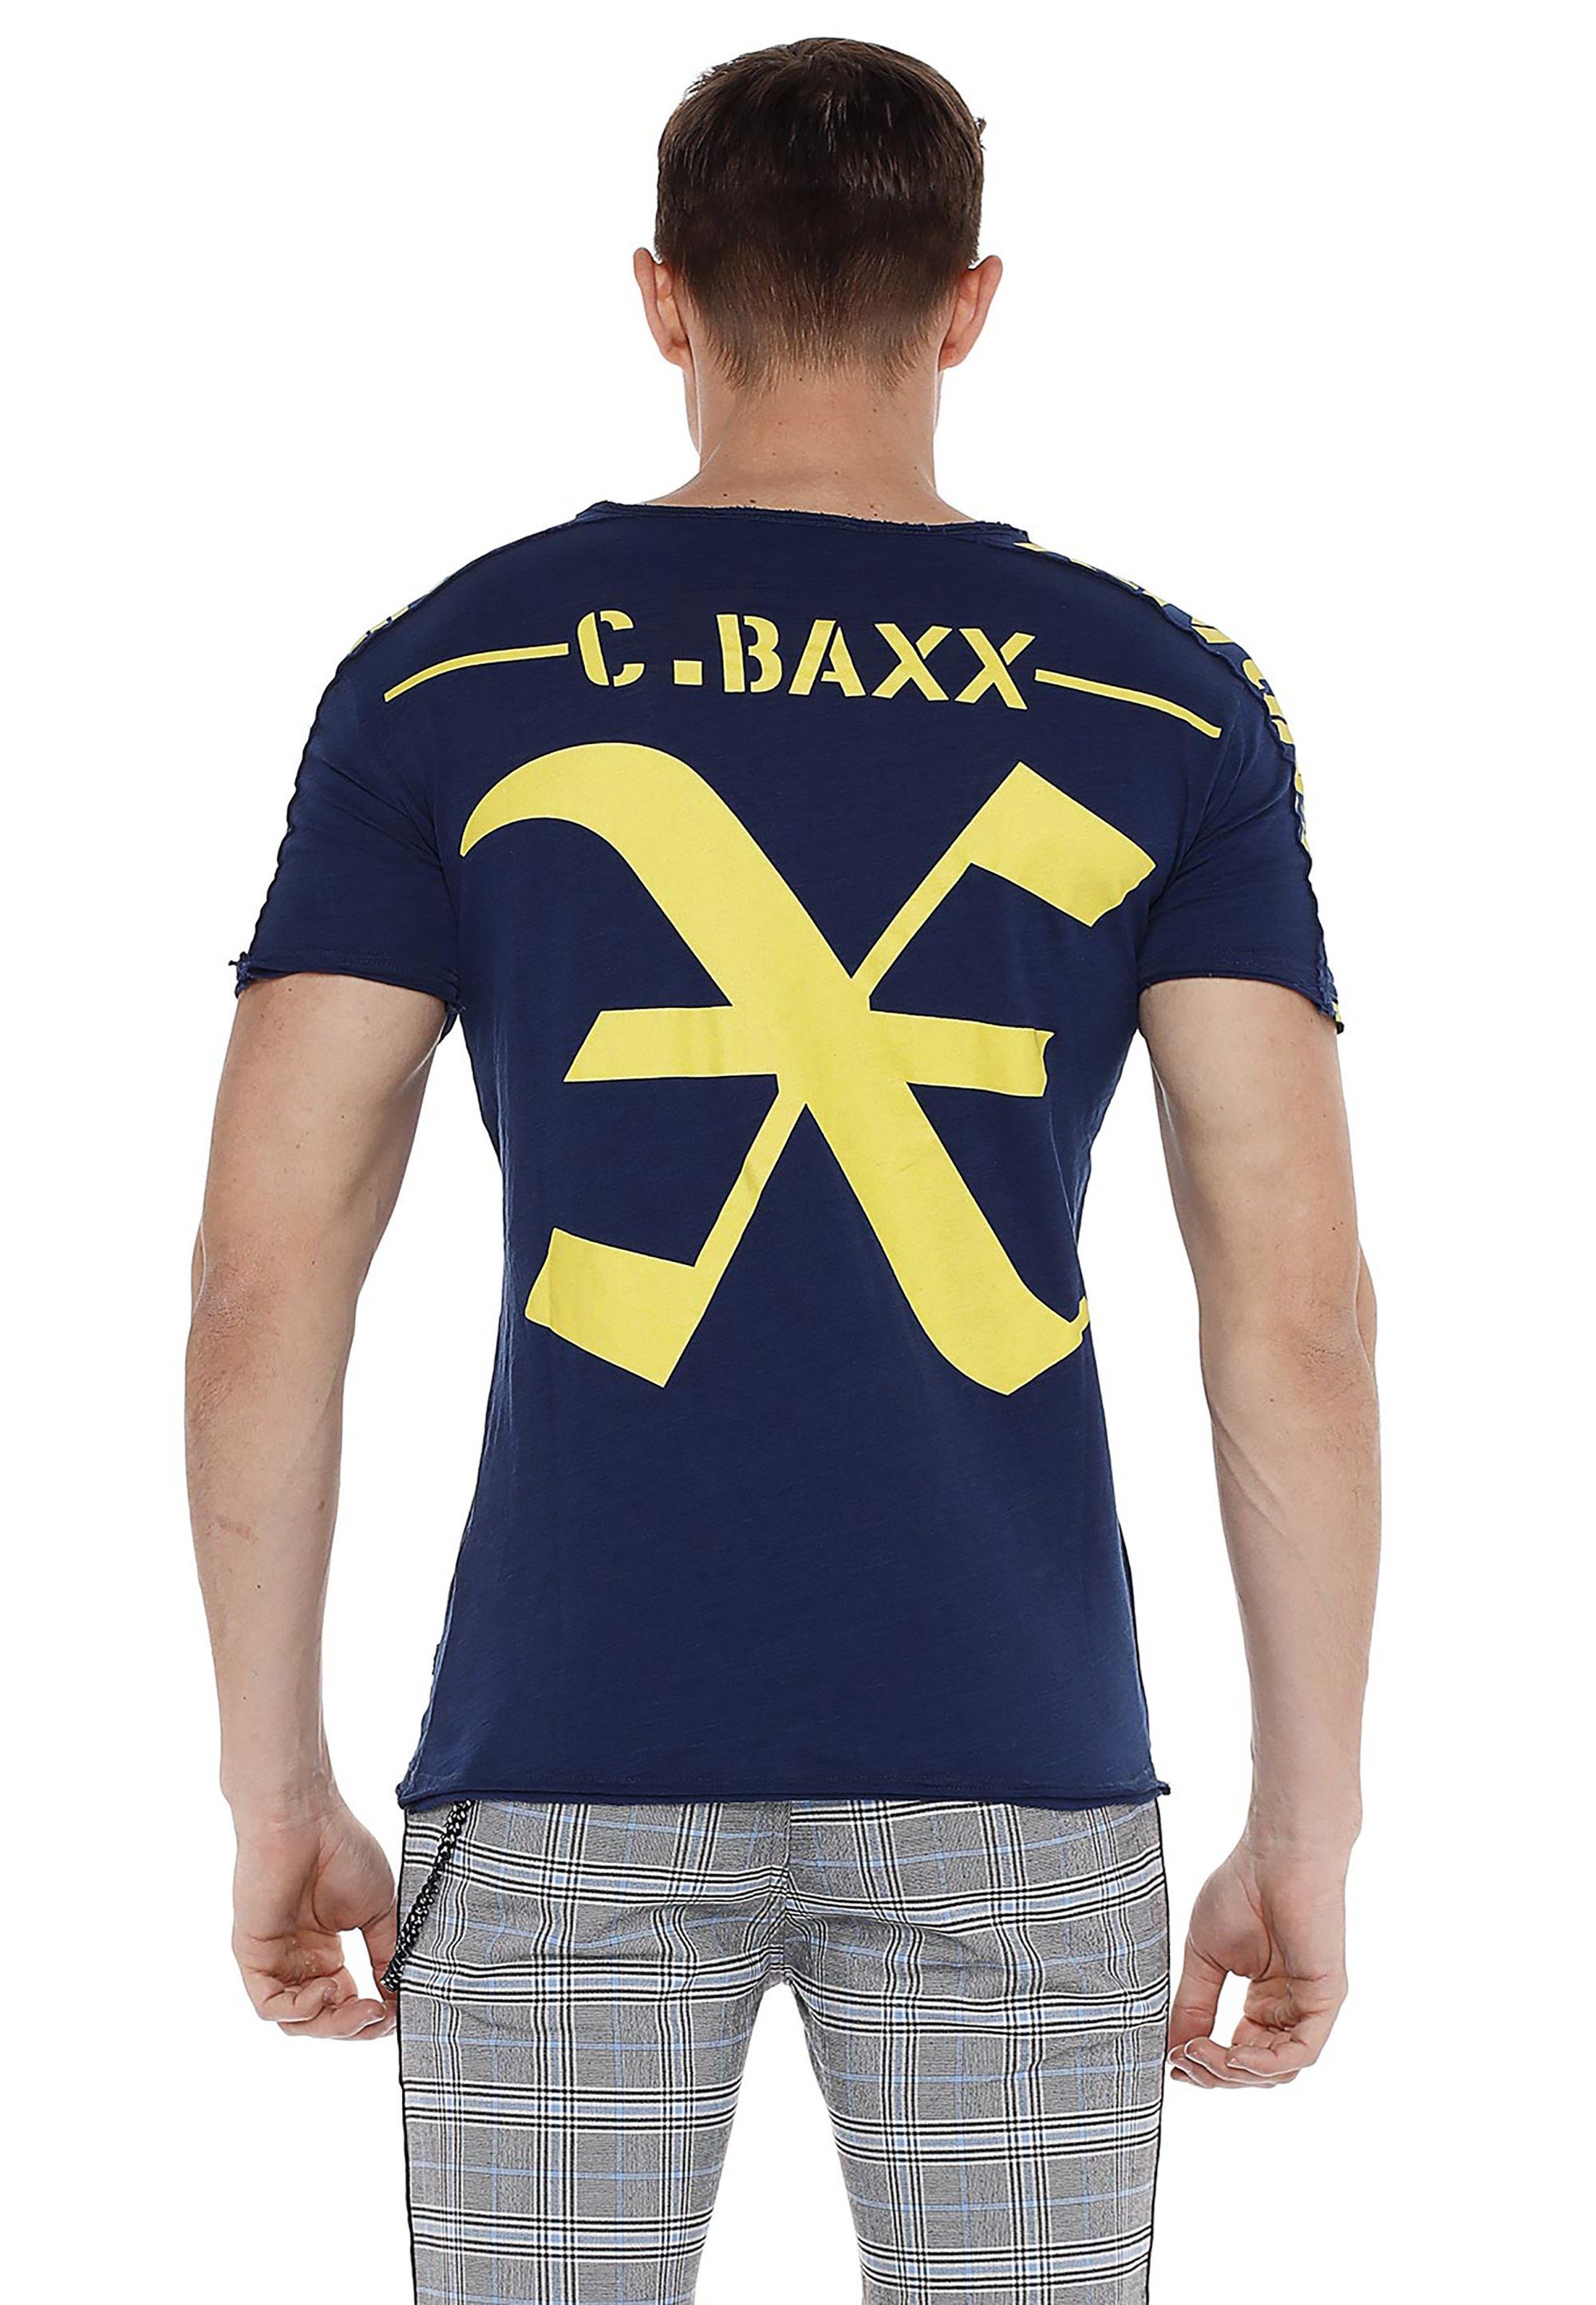 Cipo & Baxx im Relaxed-Fit T-Shirt